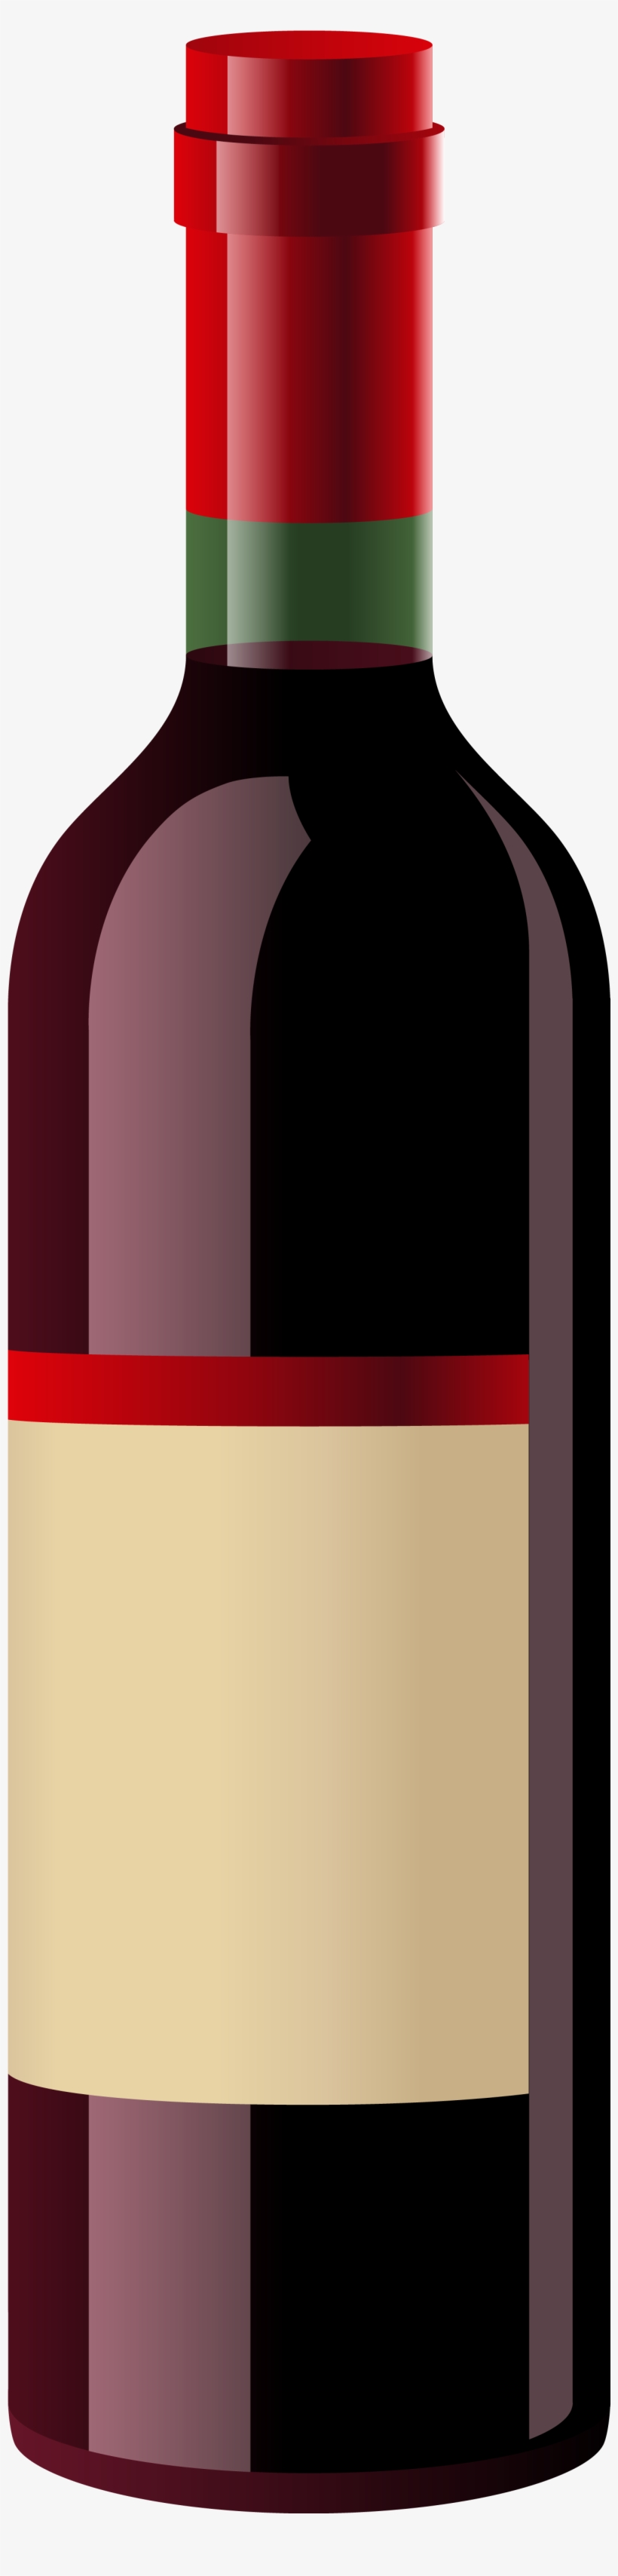 Red High Heel With Wine - Blank Wine Bottle Png, transparent png #13652